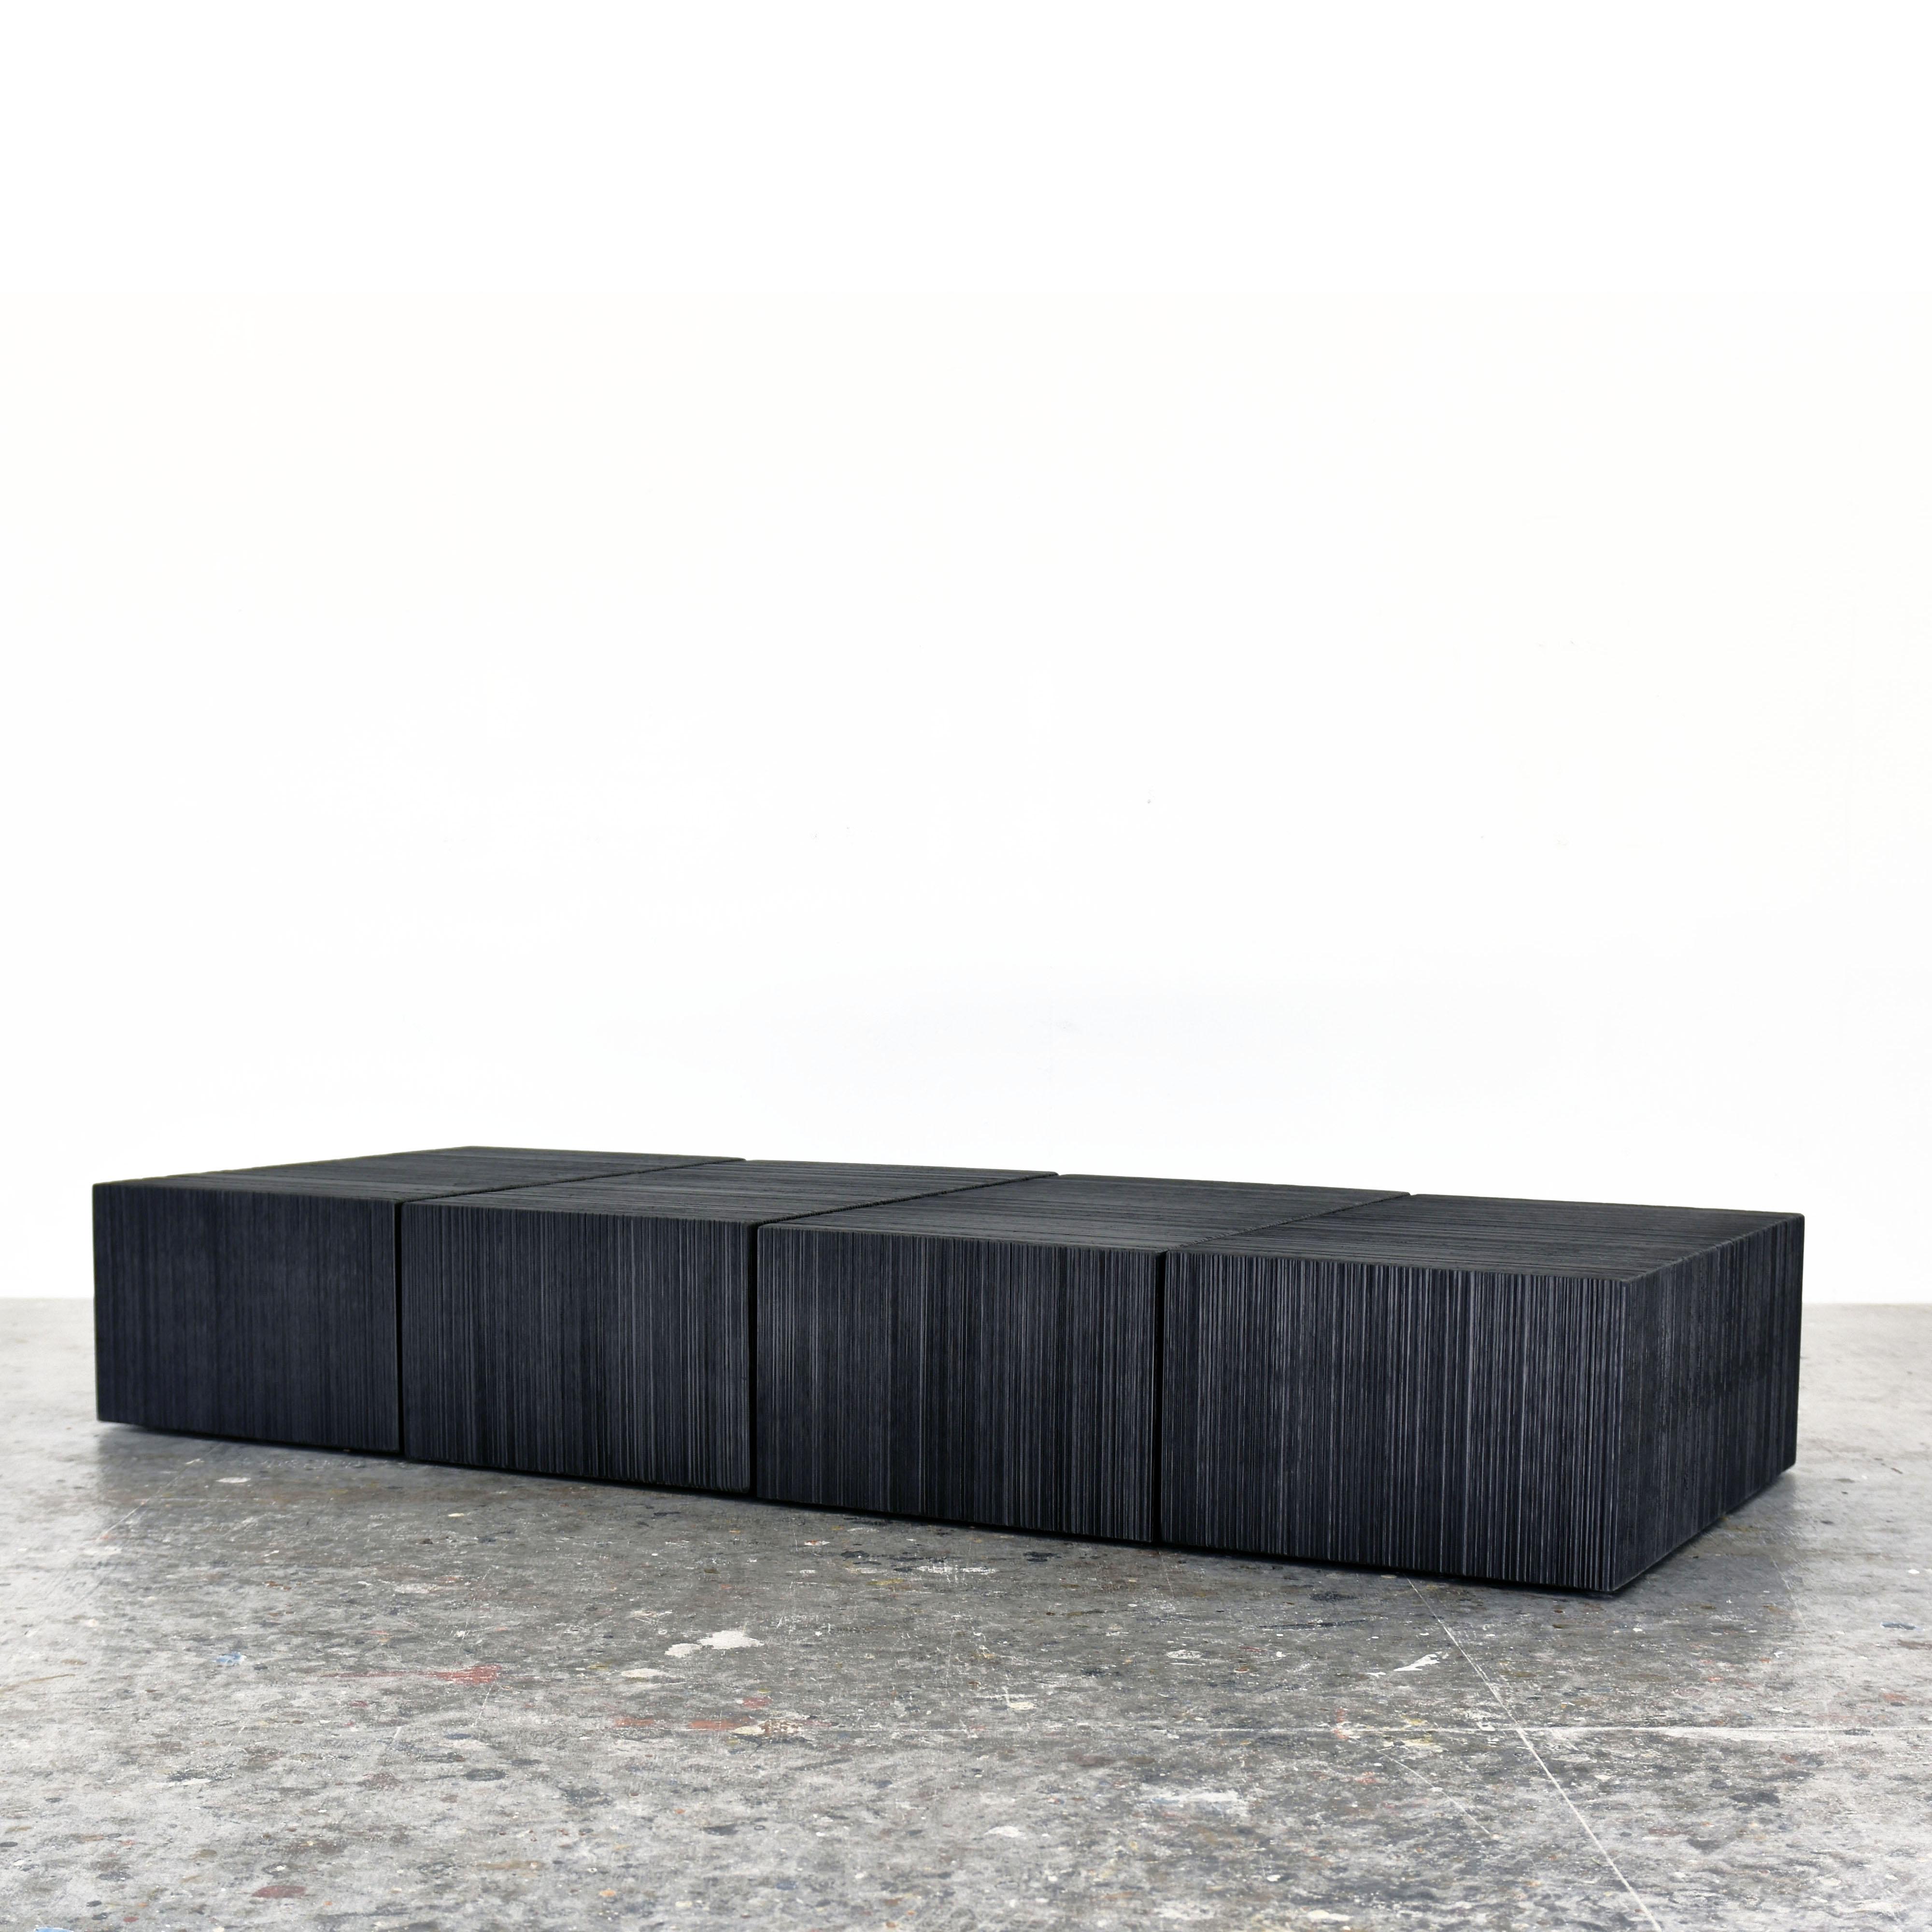 Reveal block table by John Eric Byers
Dimensions: W 28 x D 175.5 x H 71.5 cm.
Materials: sawn, lacquer, maple.

All works are individually handmade to order.

John Eric Byers creates geometrically inspired pieces that are minimal, emotional,